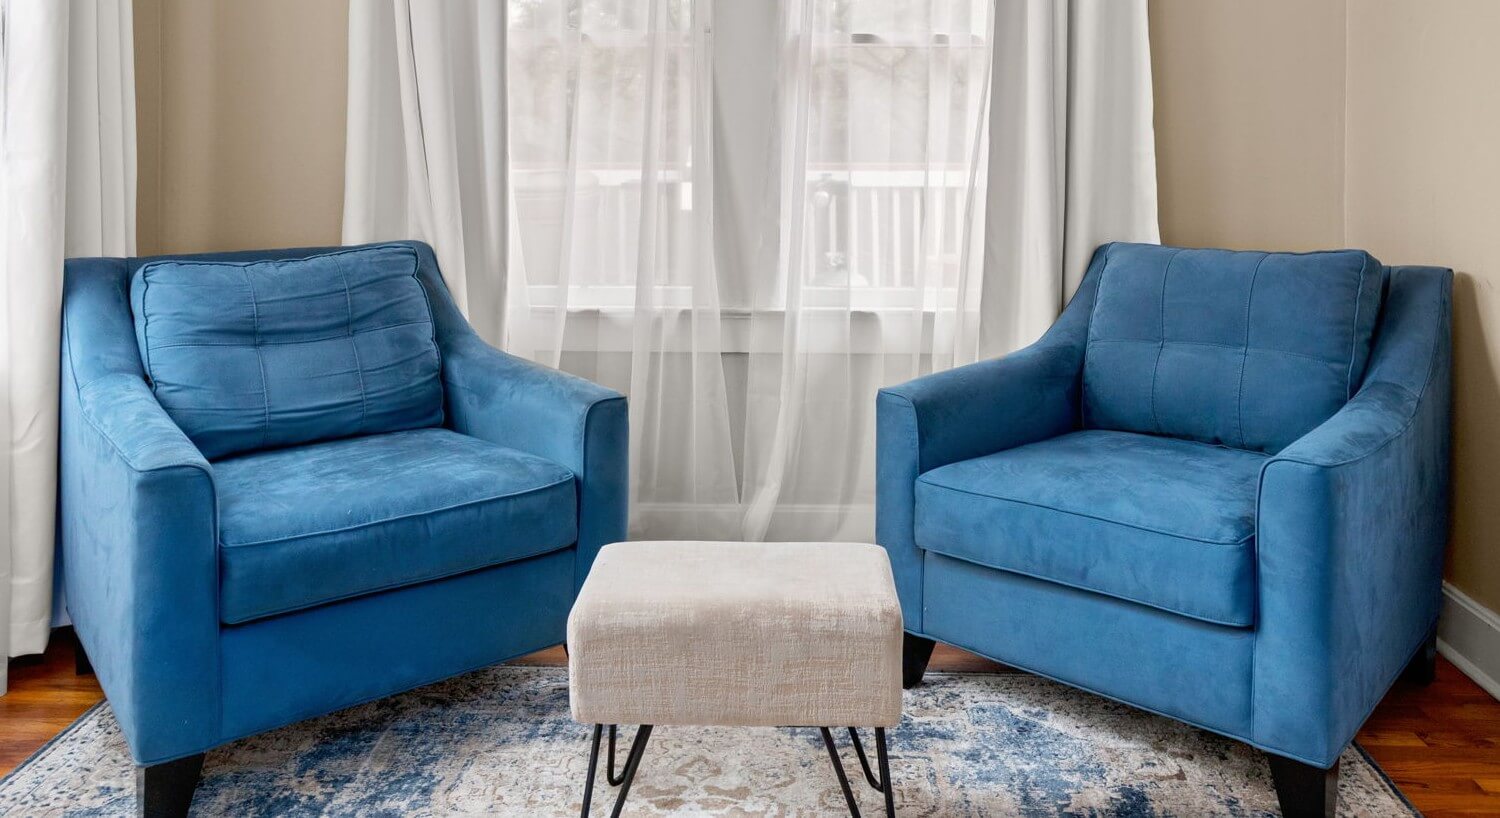 Two blue armchairs with a rug and foot rest.